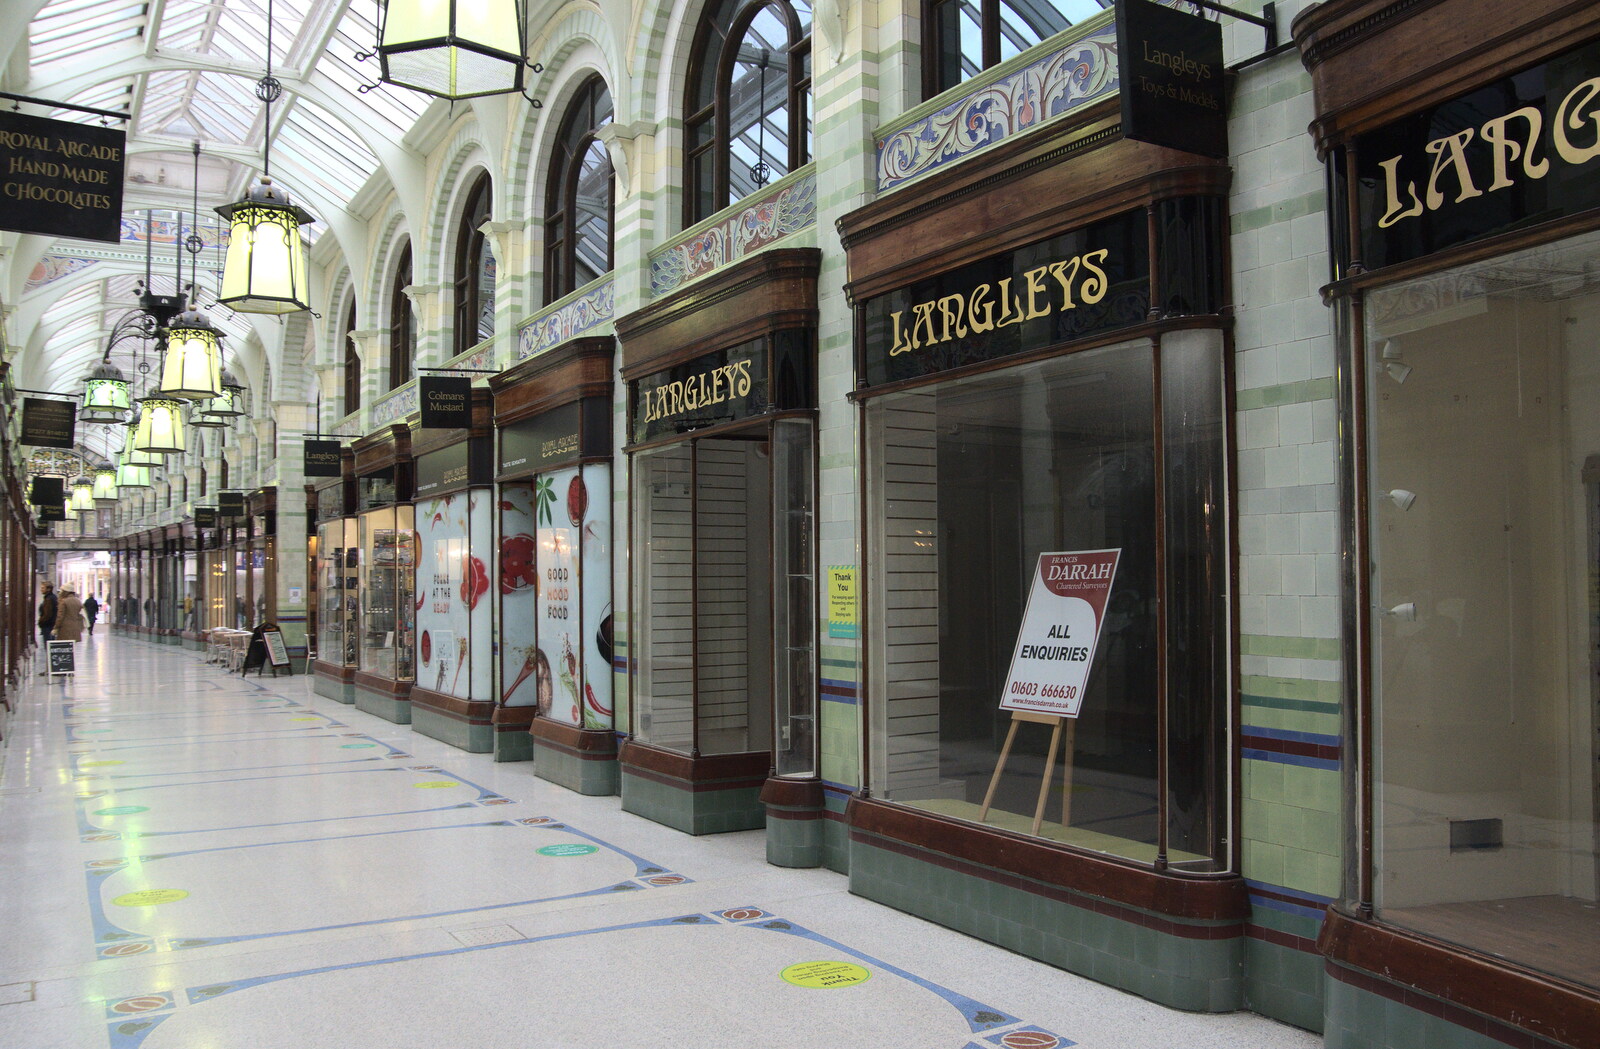 Langleys in Royal Arcade has downsized from The Lost Pubs of Norwich, Norfolk - 13th February 2022